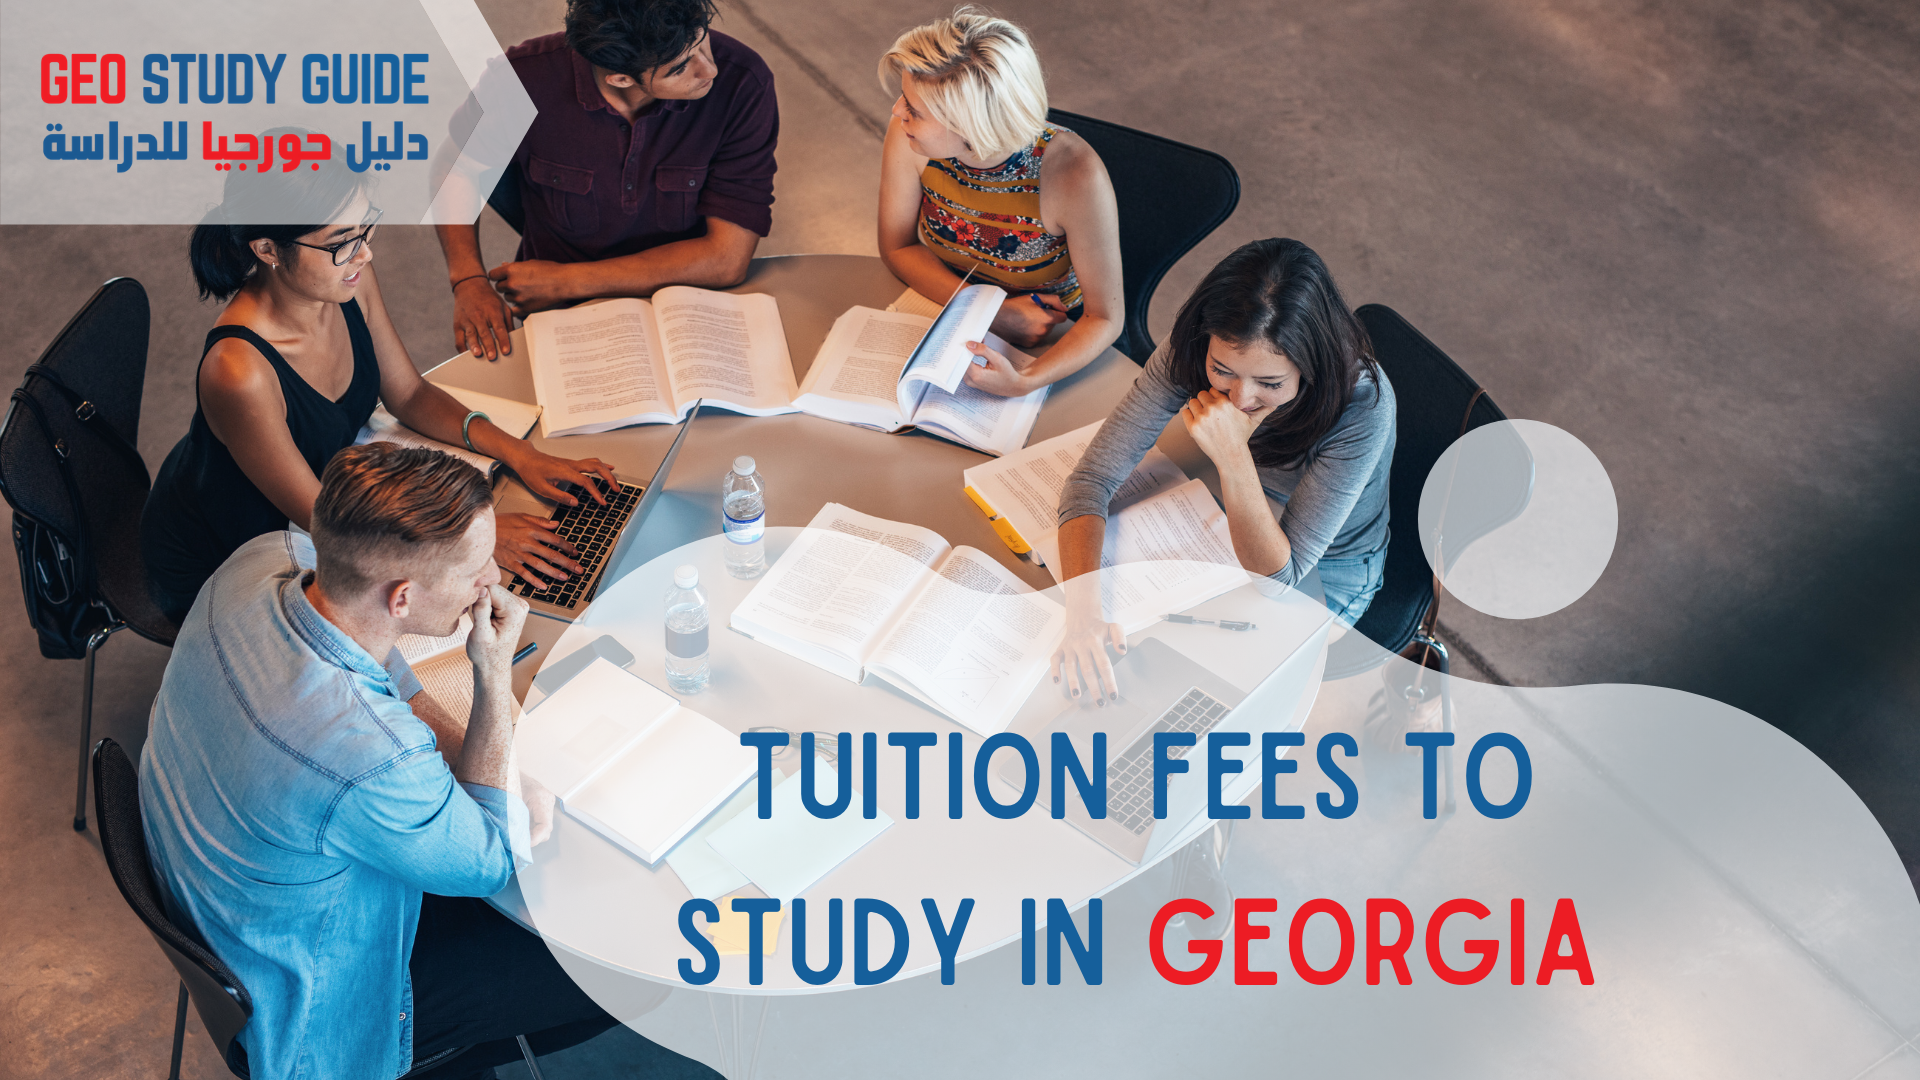 Tuition fees for universities in Georgia 2021